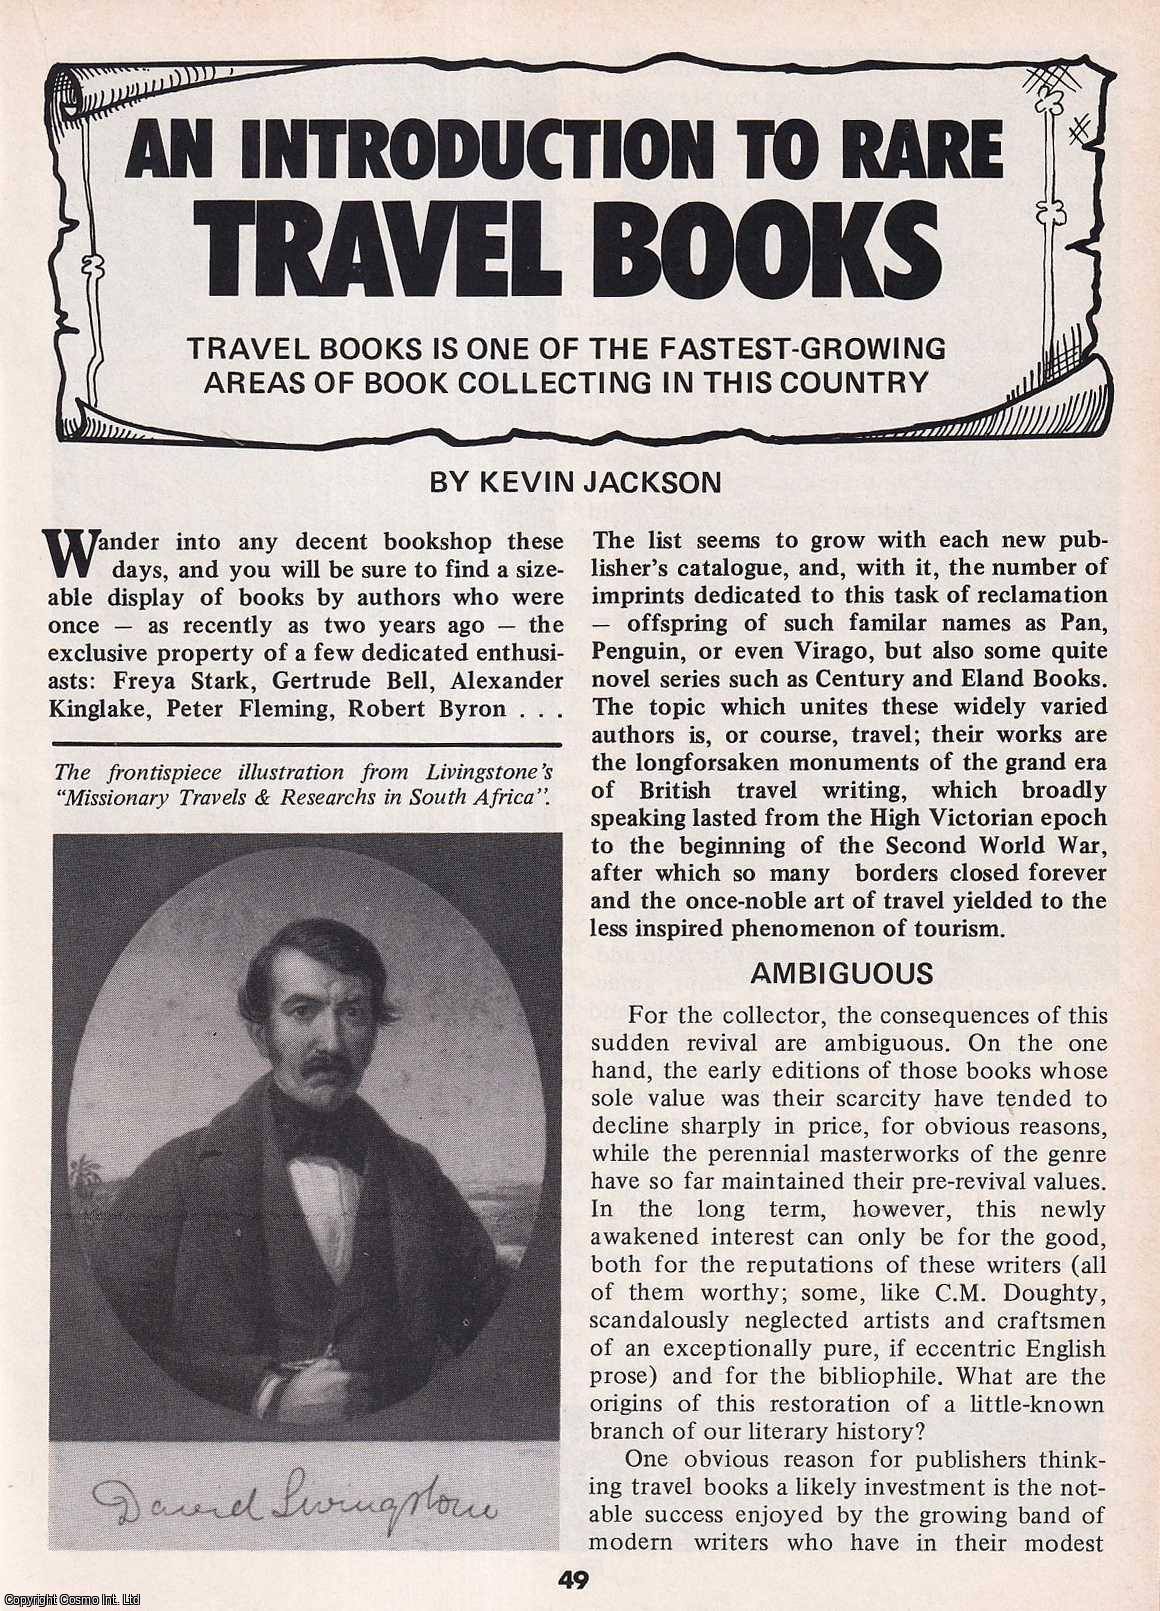 Kevin Jackson - An Introduction to original Travel Books. This is an original article separated from an issue of The Book & Magazine Collector publication.